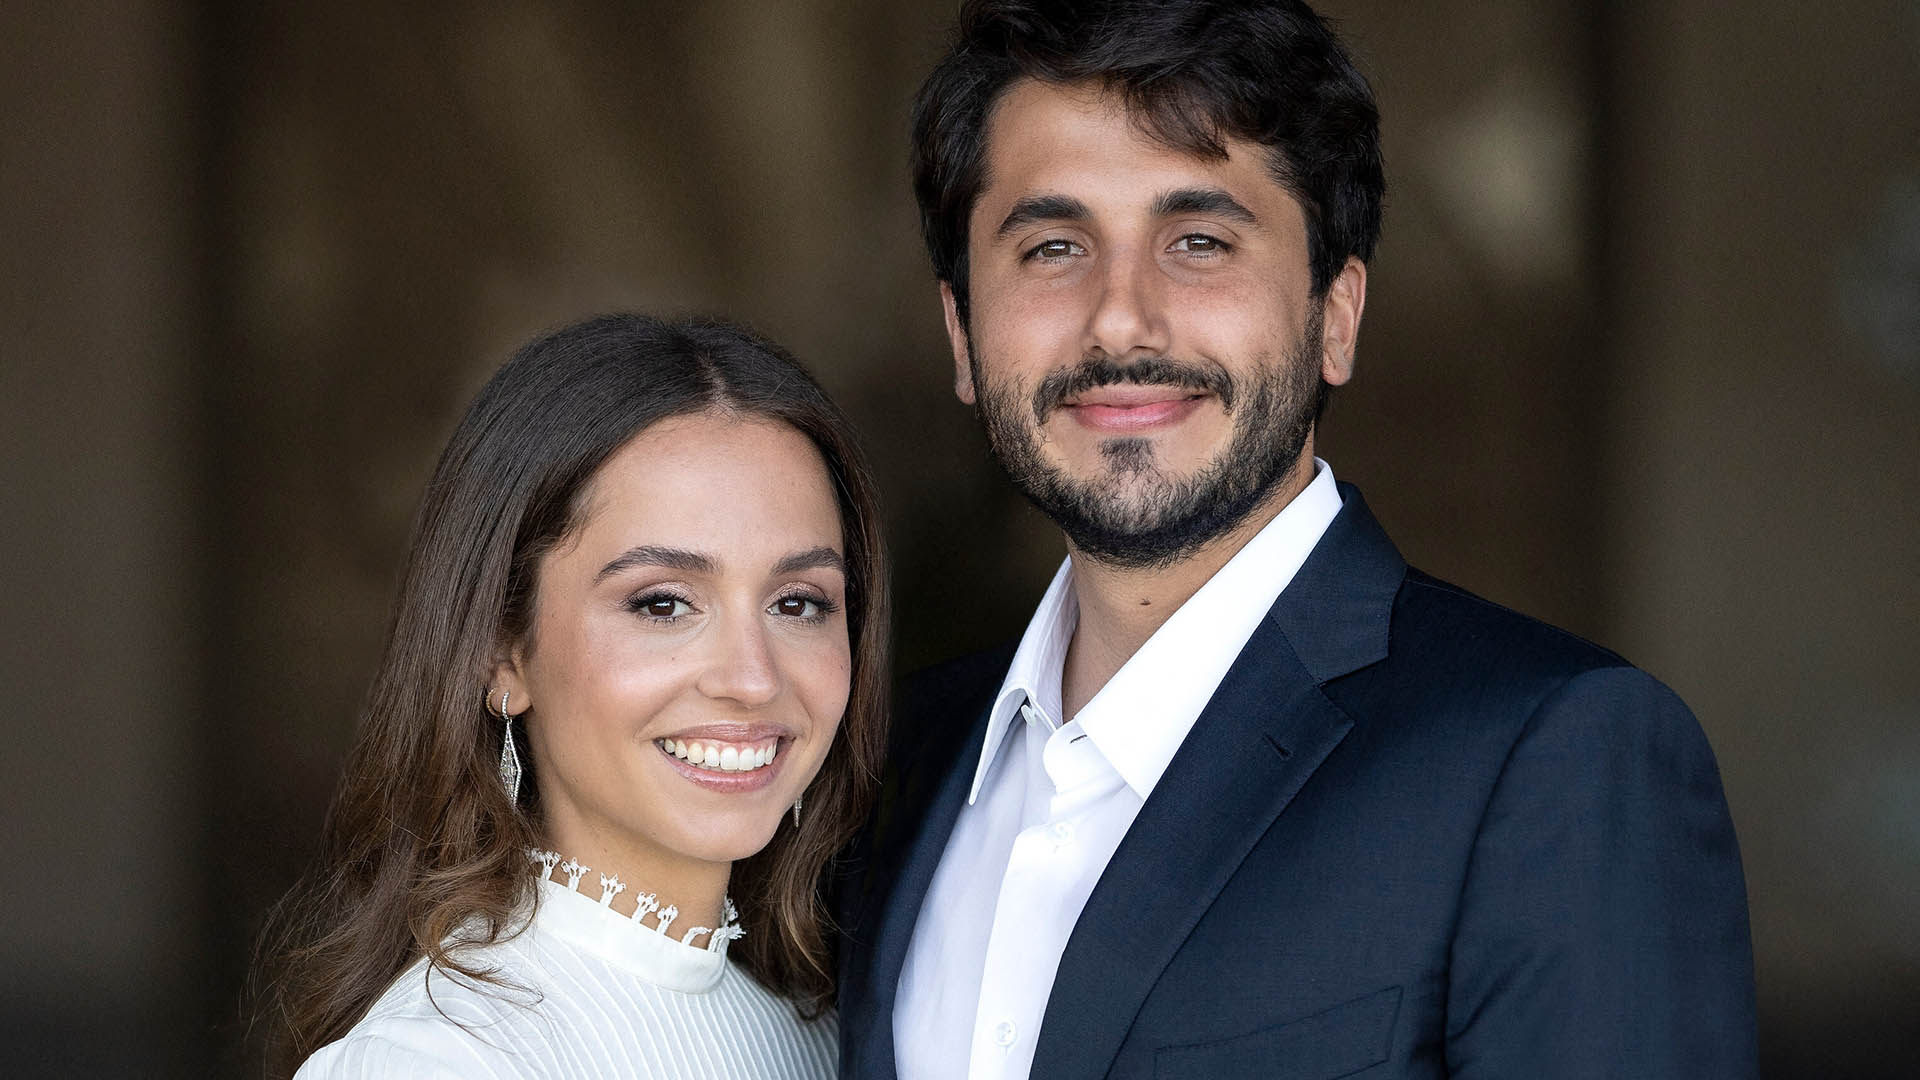 Princess Iman bint Abdullah II engaged to Jameel Alexander Thermiotis, as announced by the Hashemite Royal Court on July 5, 2022.